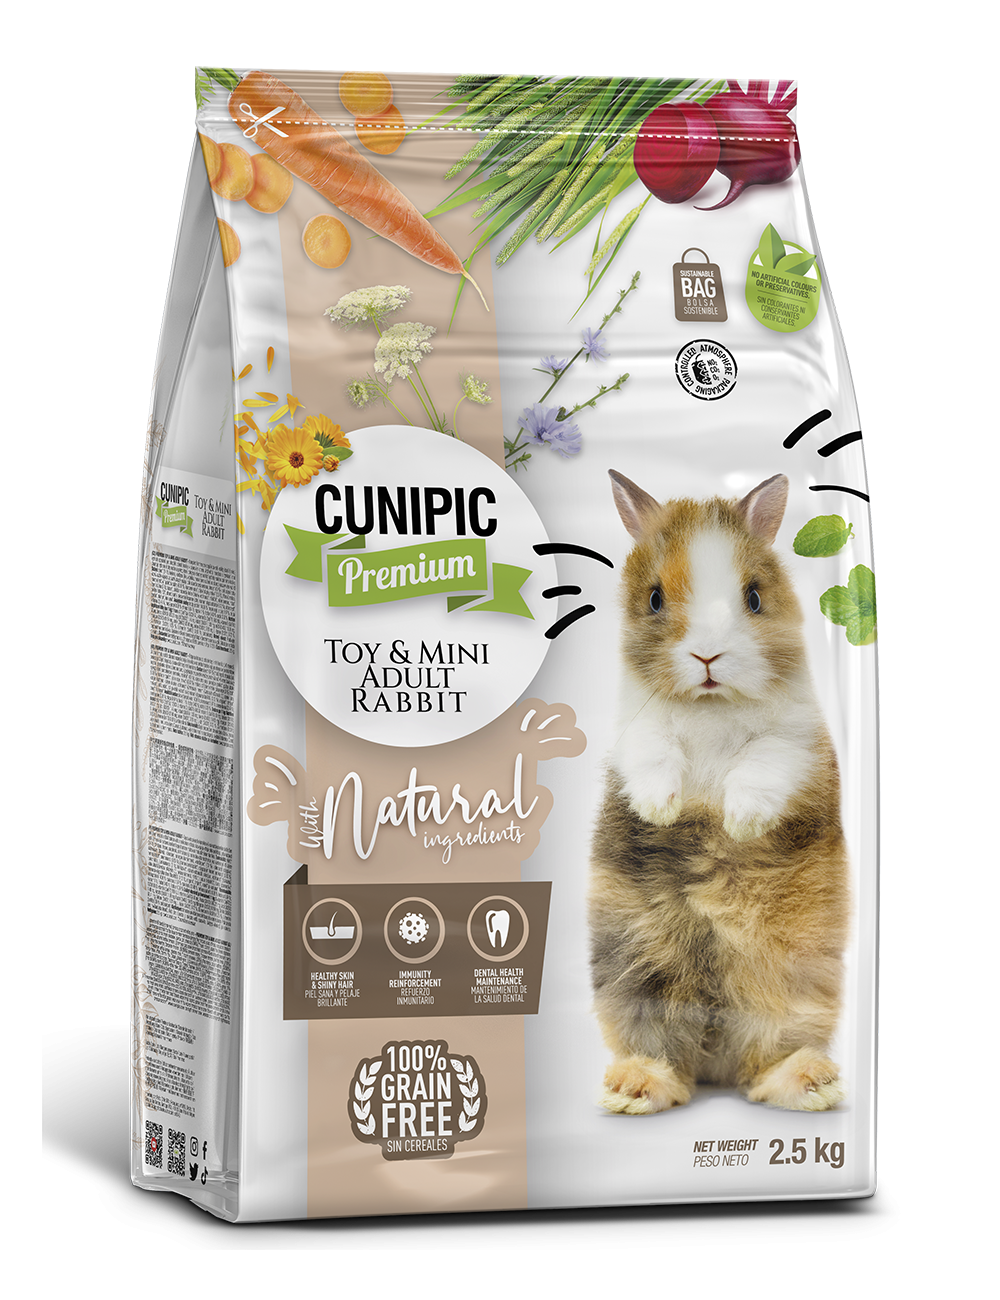 CUNIPIC - Premium Food for Toy Rabbits